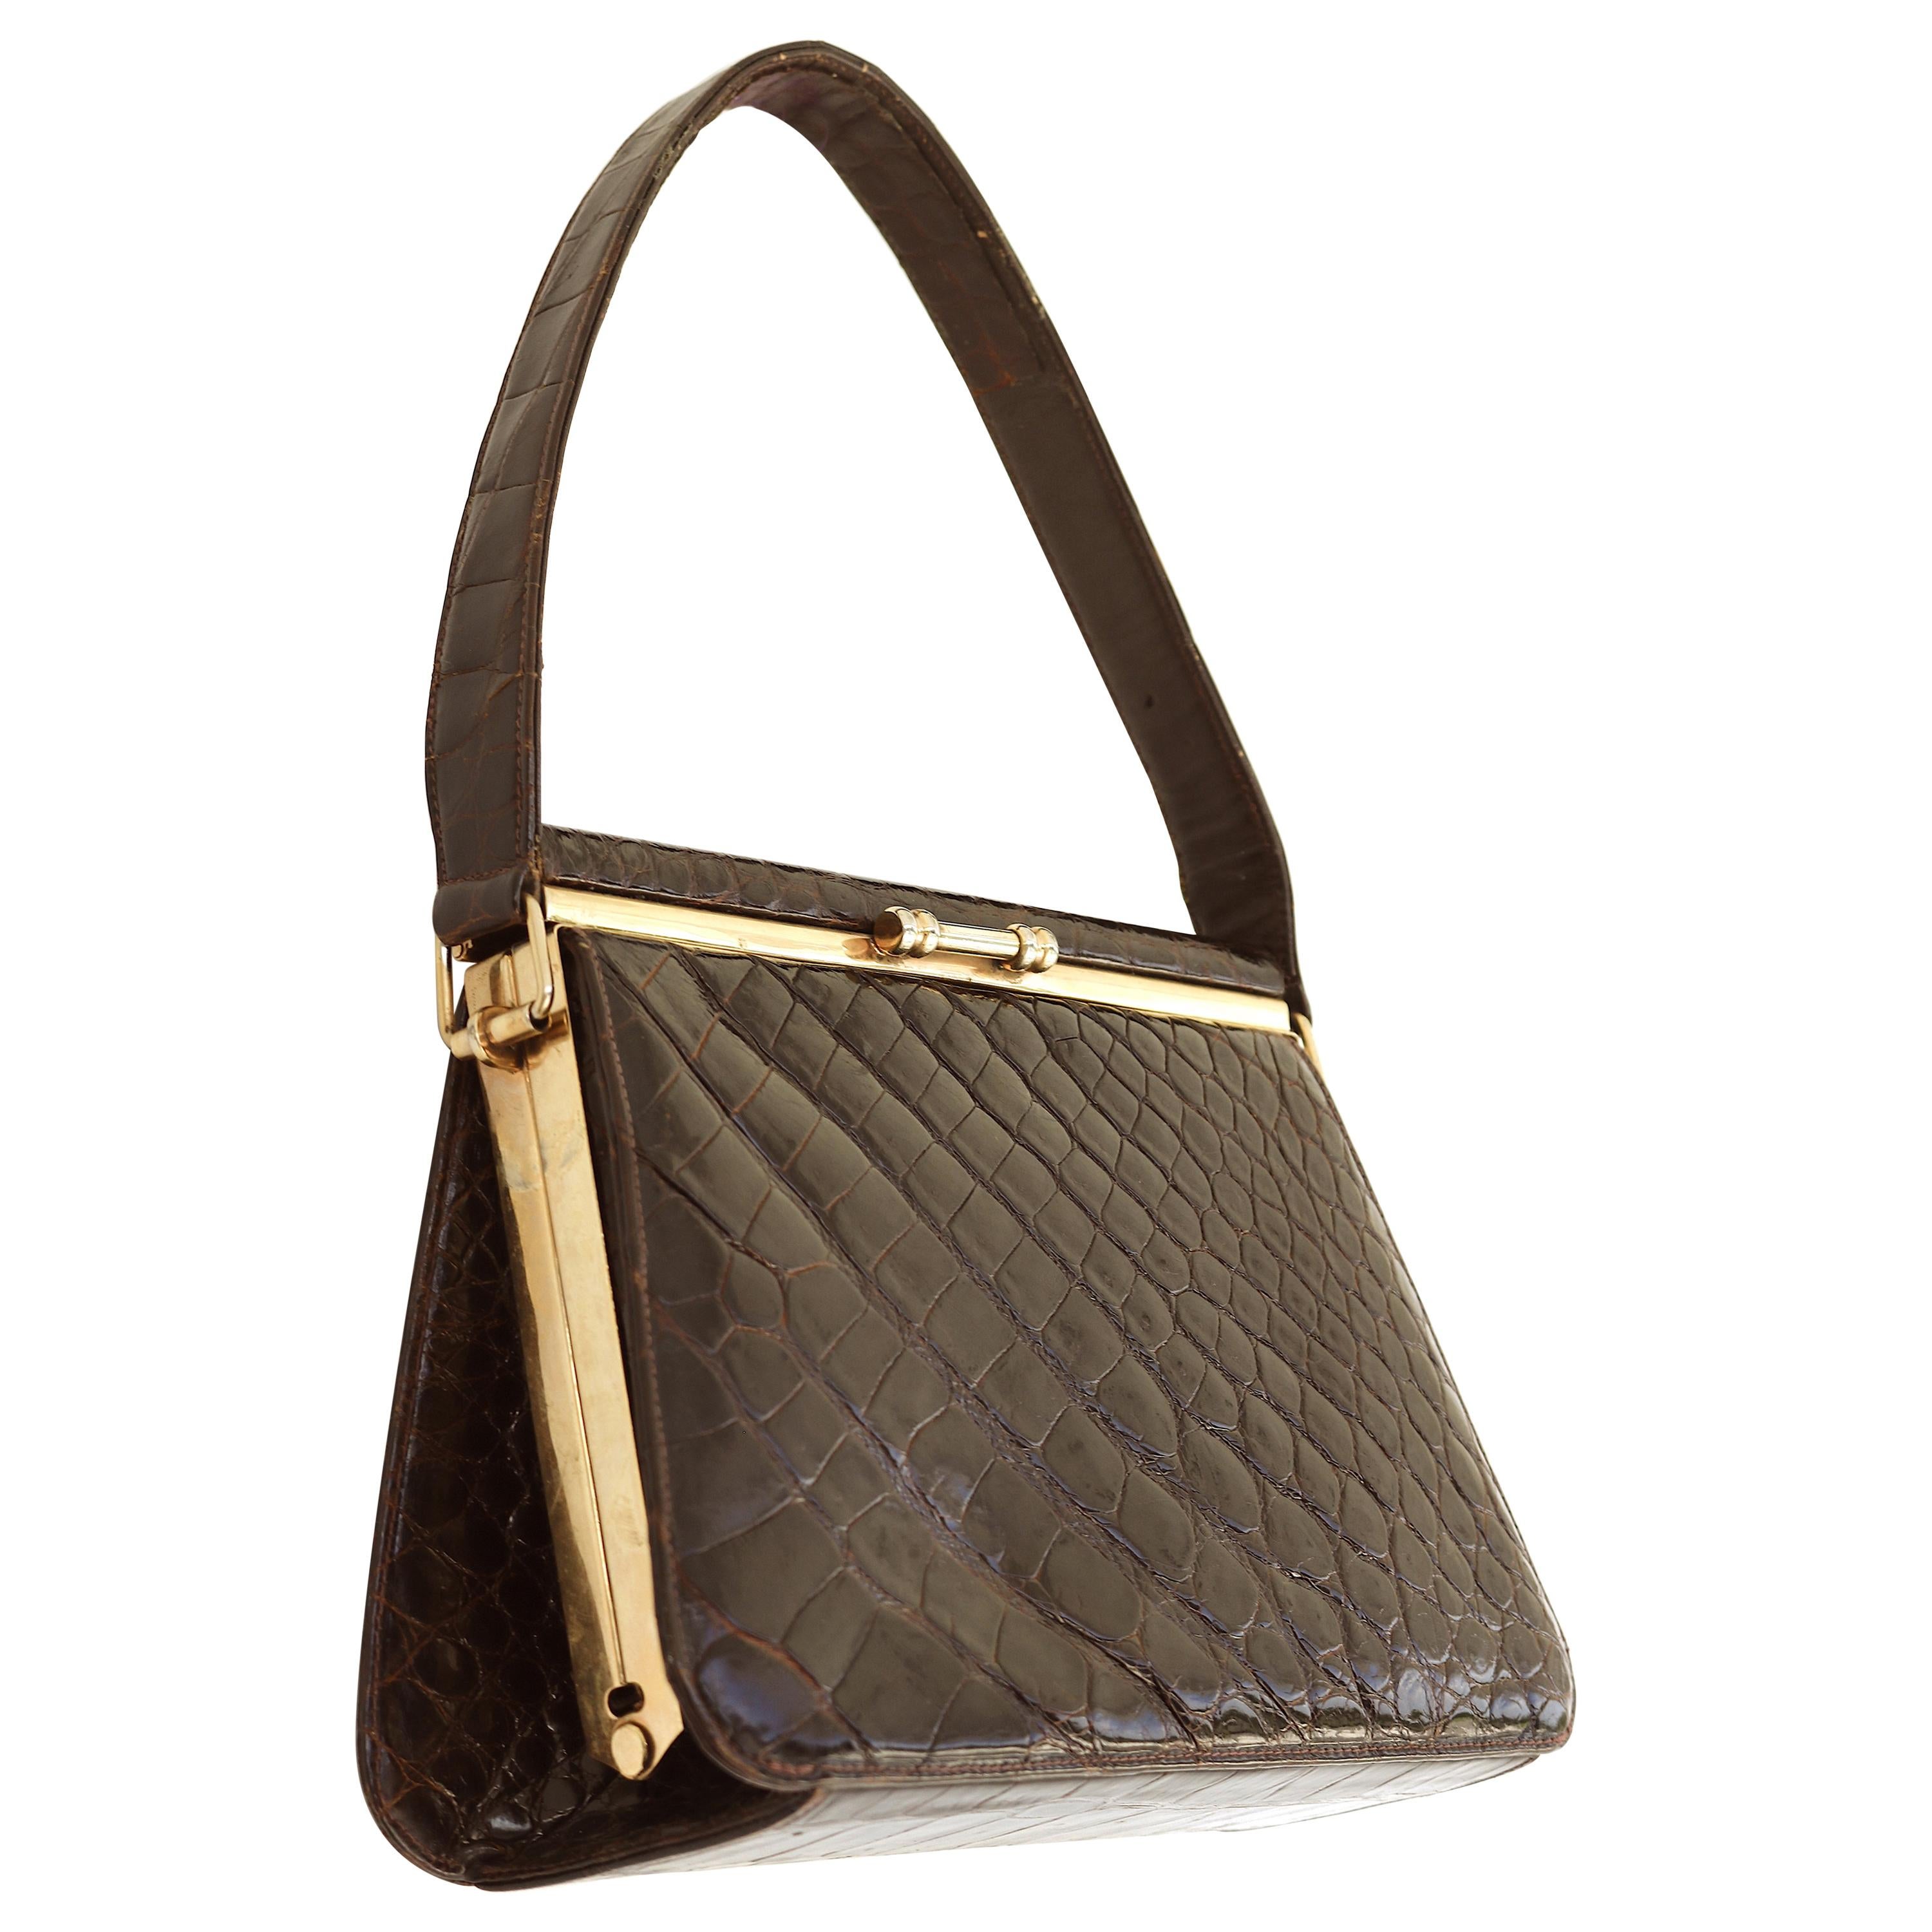 Exquisite Small Flip Top Crocodile Handbag-Gold Plated Frame For Sale